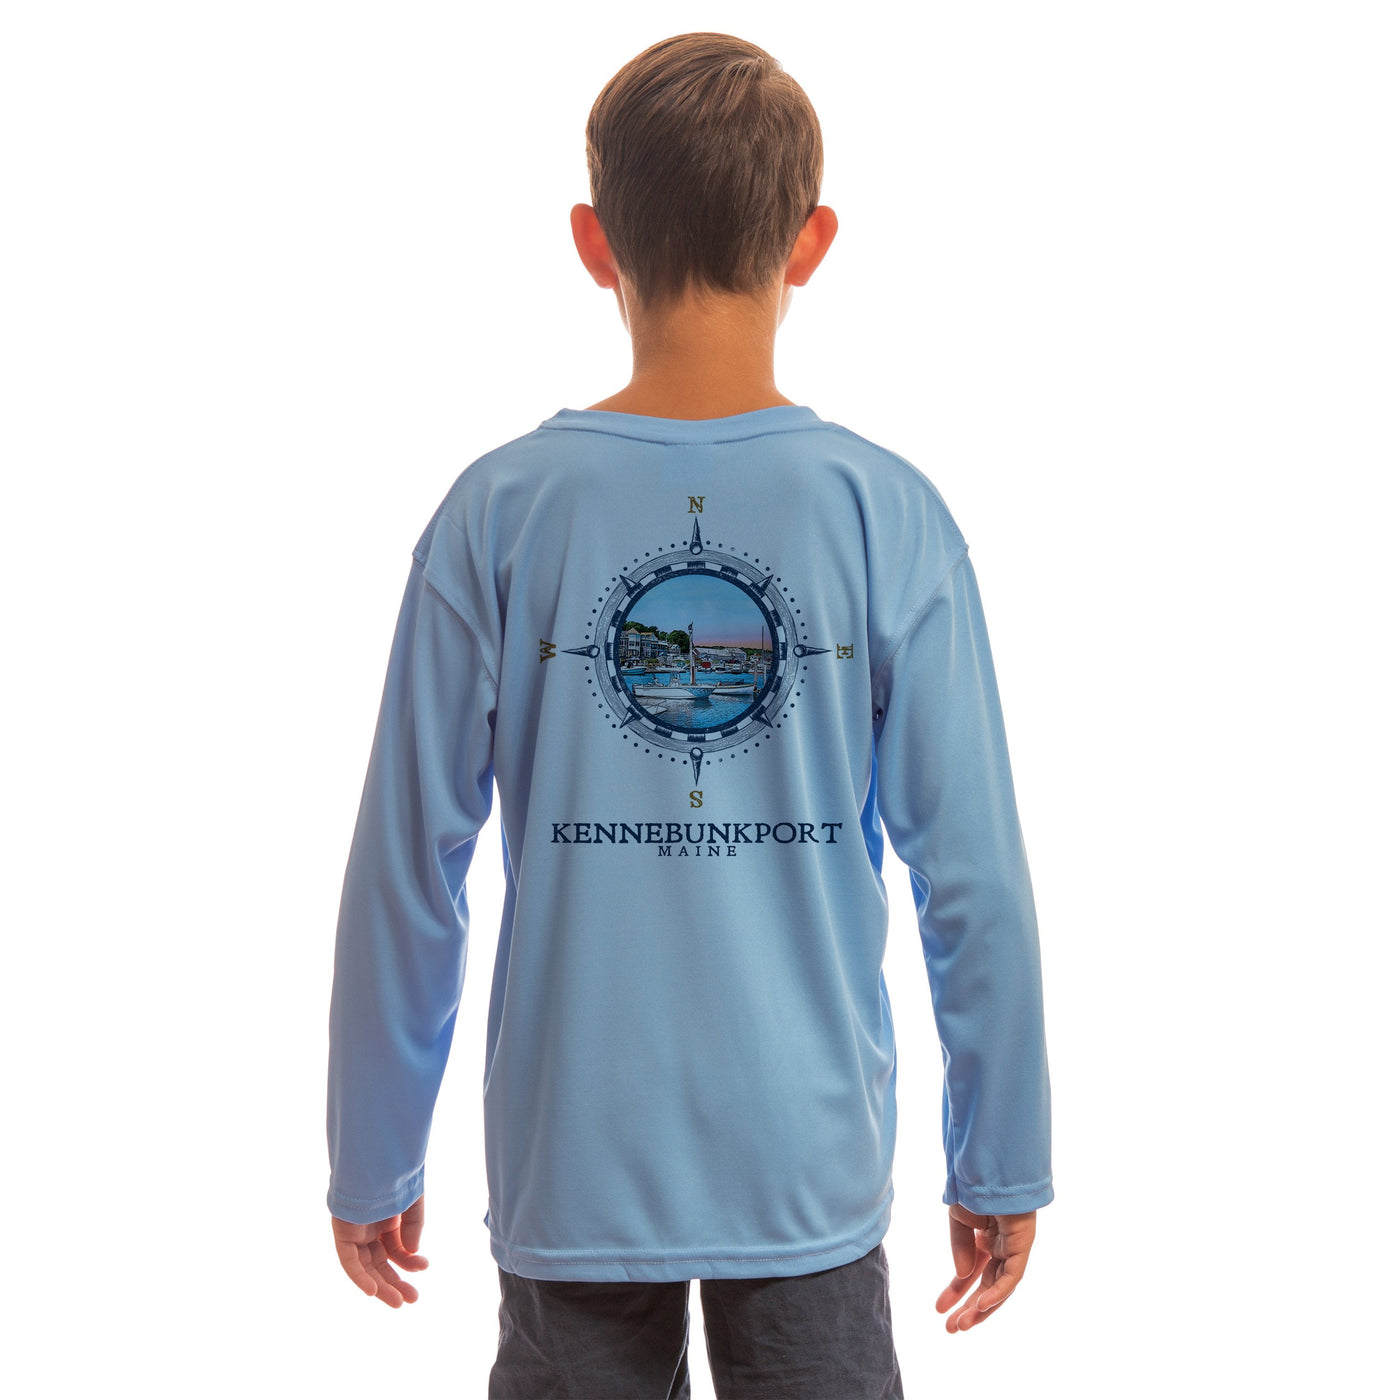 Compass Vintage Kennebunkport Youth UPF 50+ UV/Sun Protection Long Sleeve T-Shirt